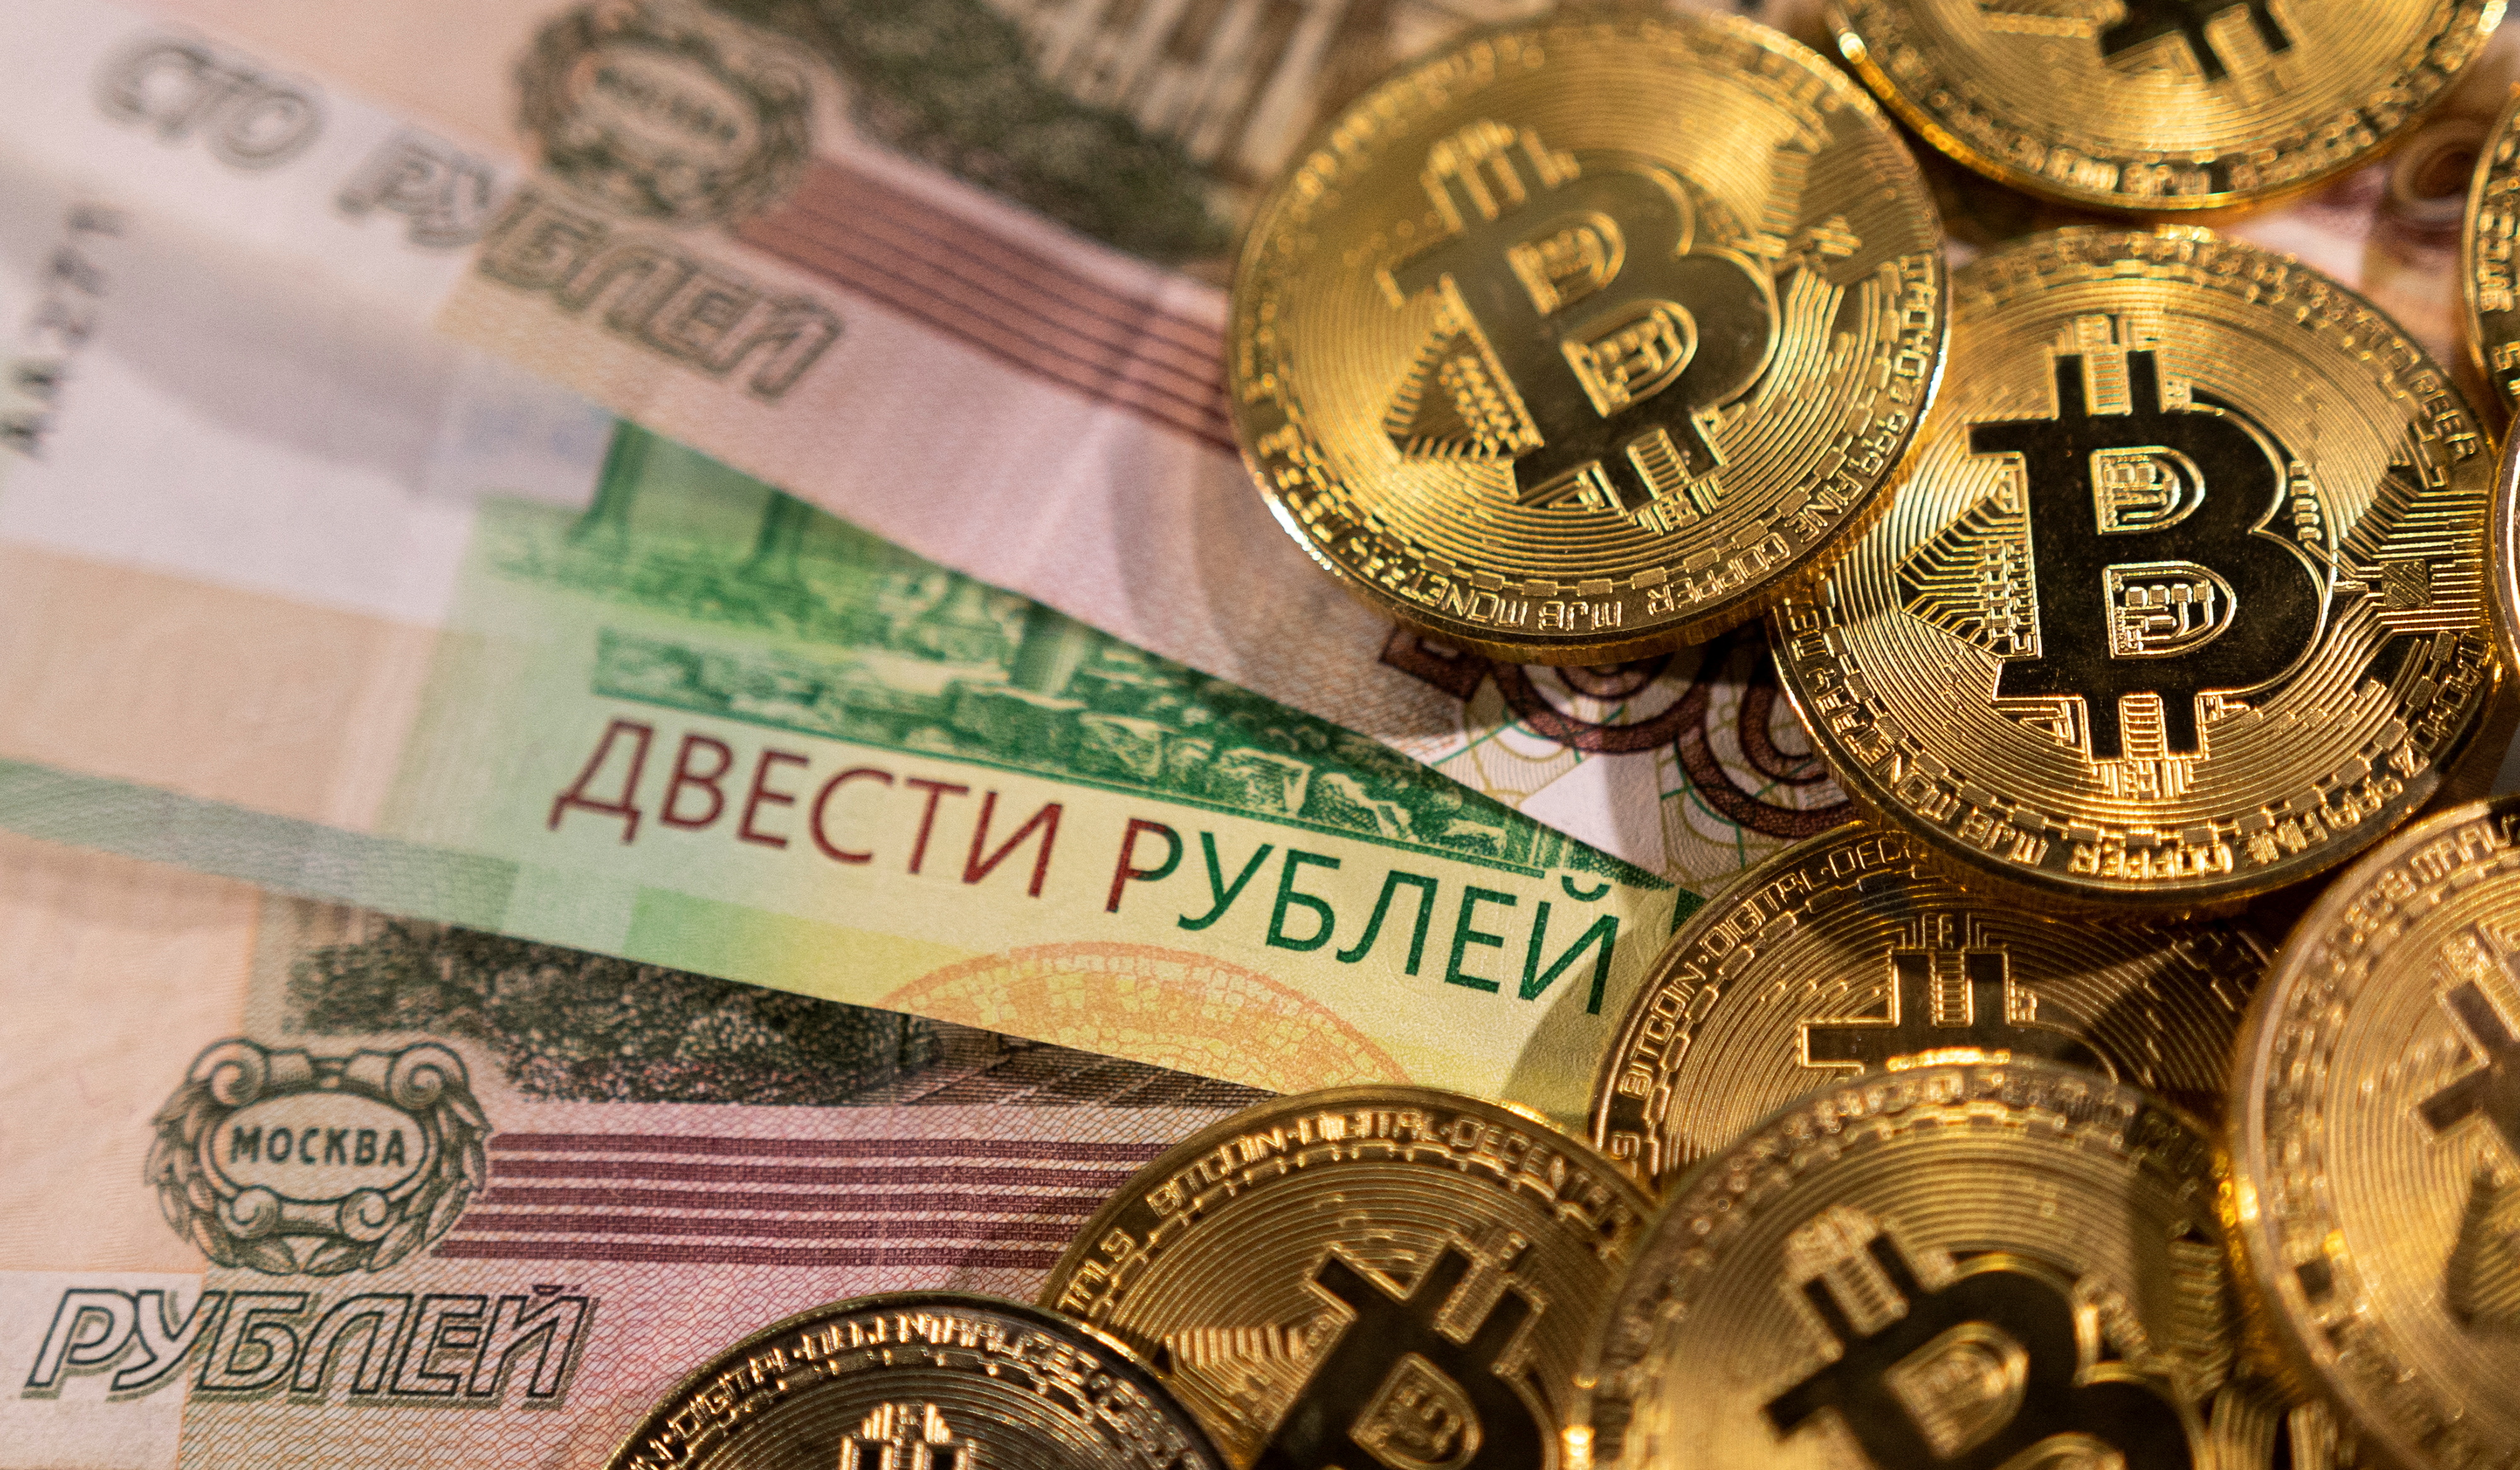 FILE PHOTO: Russian rouble banknotes and representations of the cryptocurrency Bitcoin are seen in this illustration taken March 1, 2022. REUTERS/Dado Ruvic/Illustration/File Photo